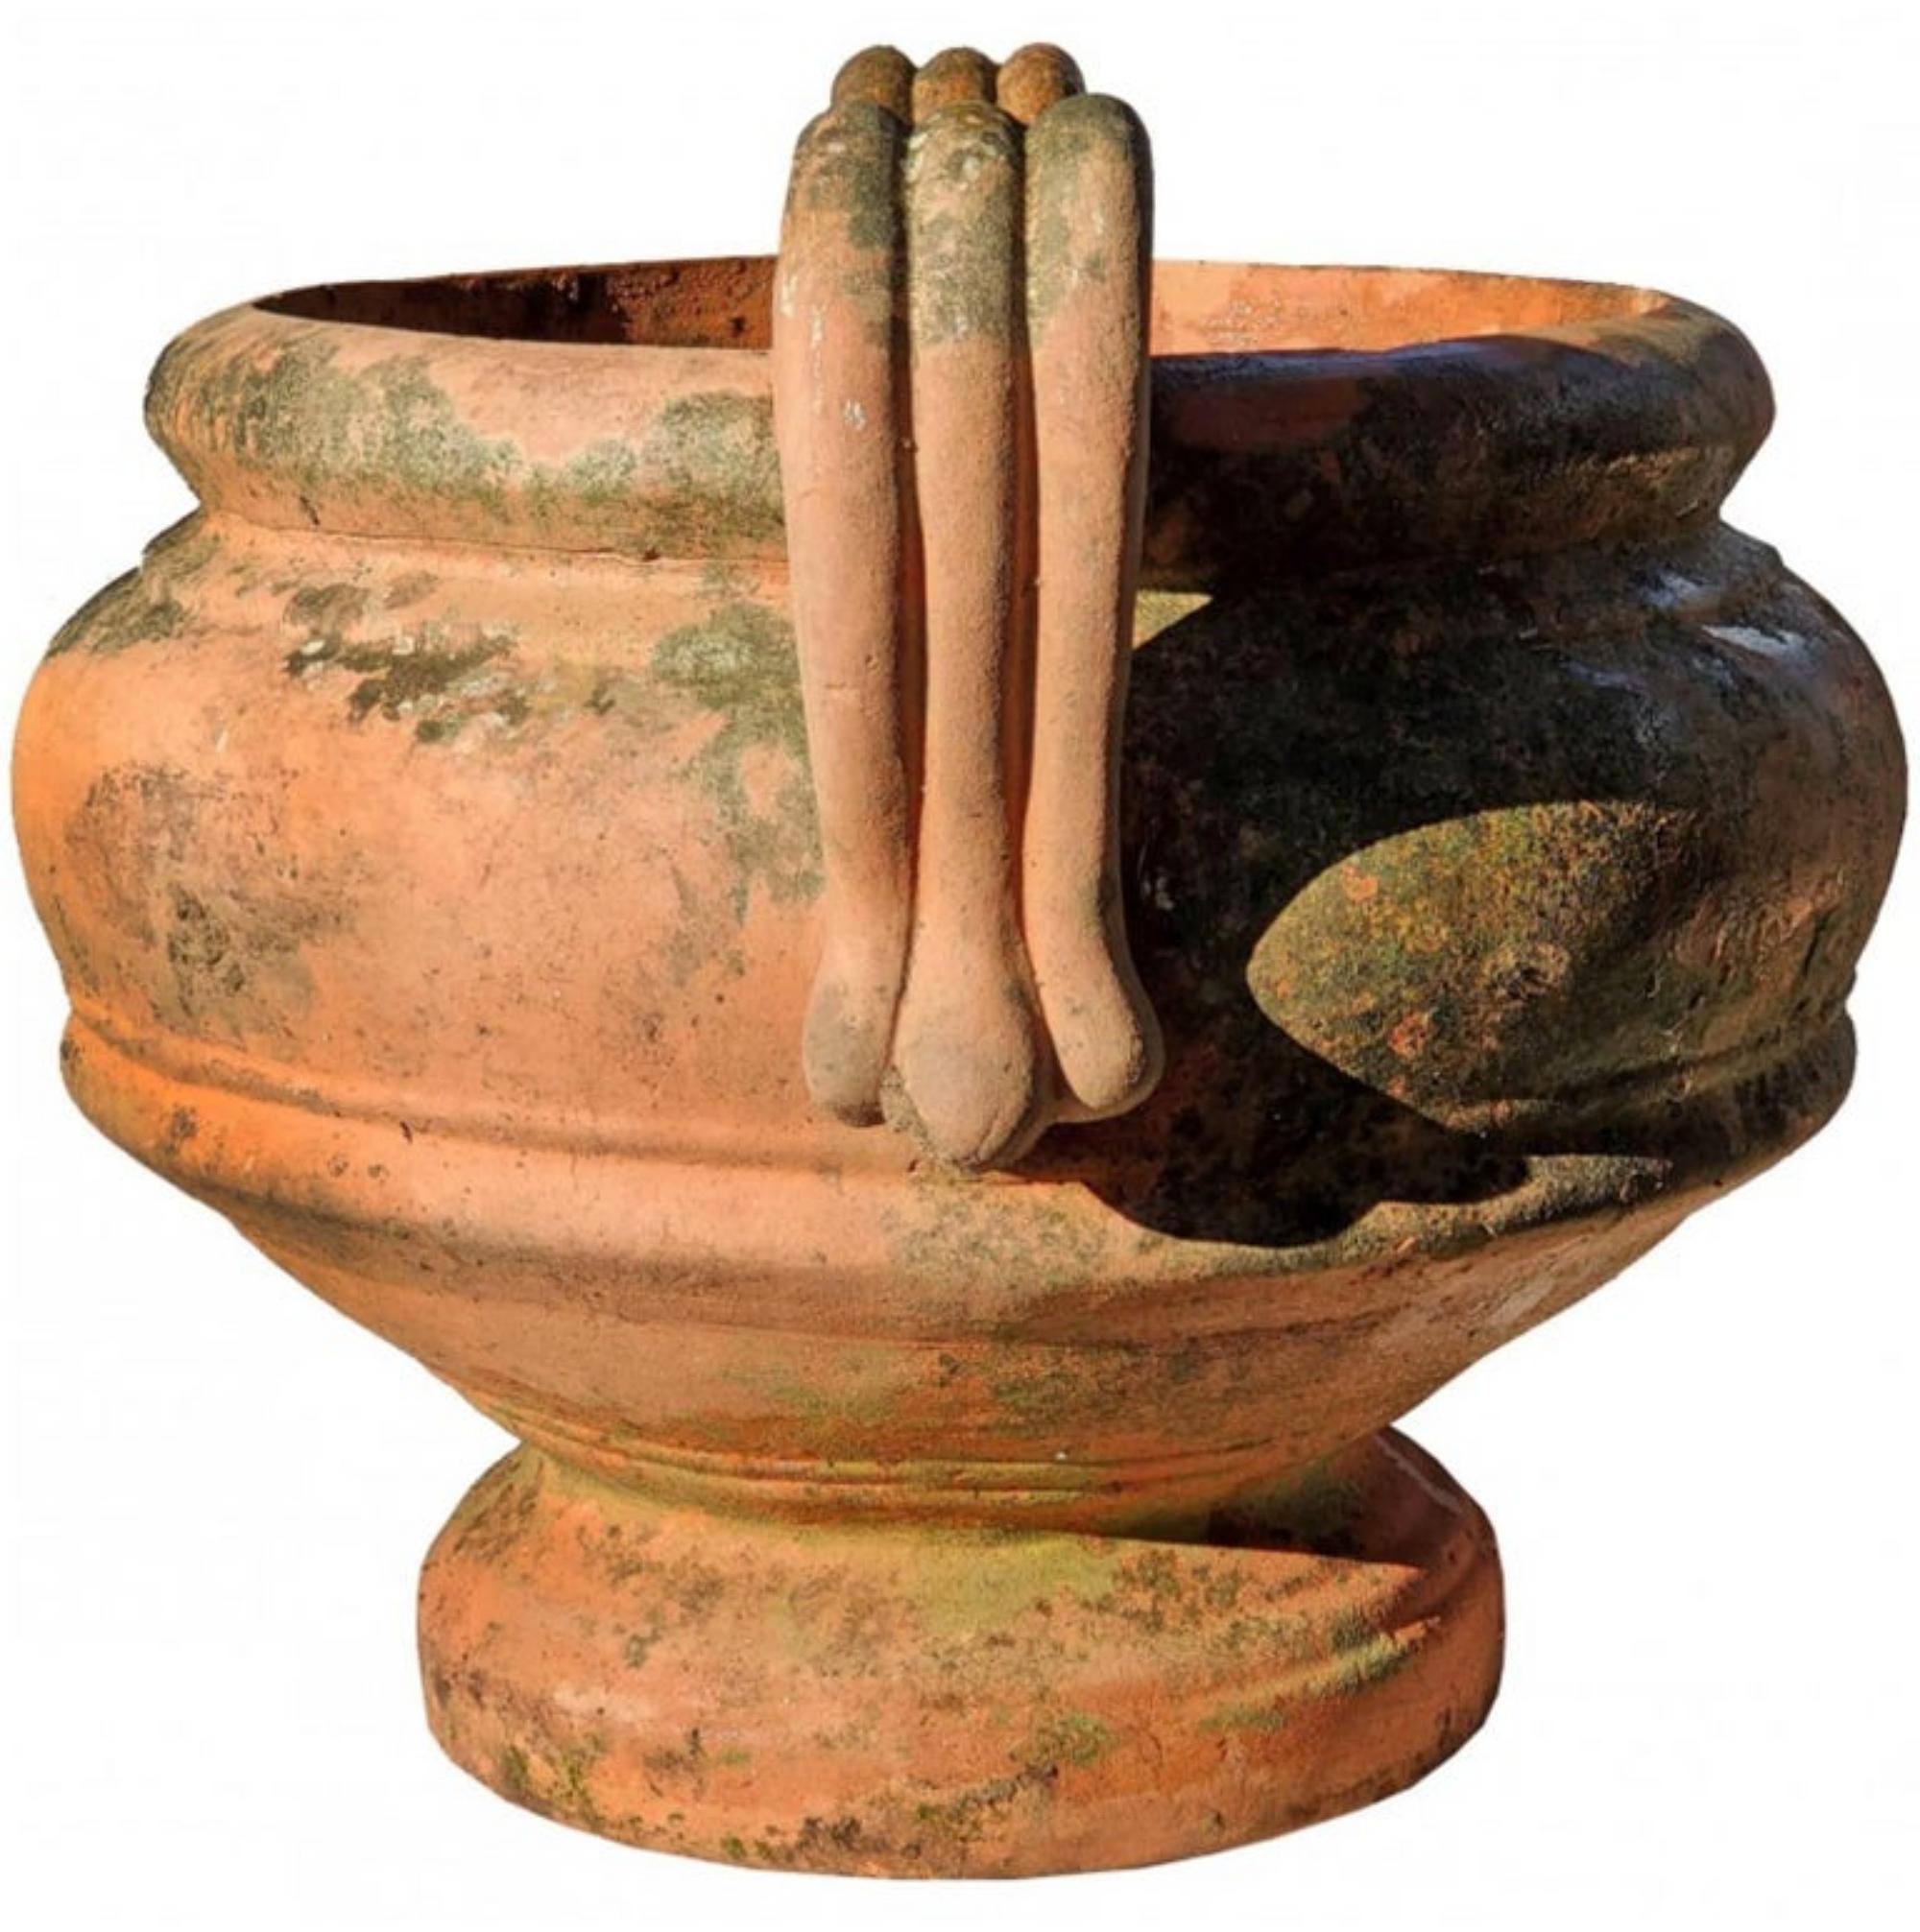 Ancient original cachepot in terracotta Lucchese - Tuscany 19th century.

Original antique terracotta Cachepot from Lucca - Tuscany.
Vase with handles.

Measures: height 34 cm.
Base diameter 20 cm.
Internal dimensions of the mouth 27